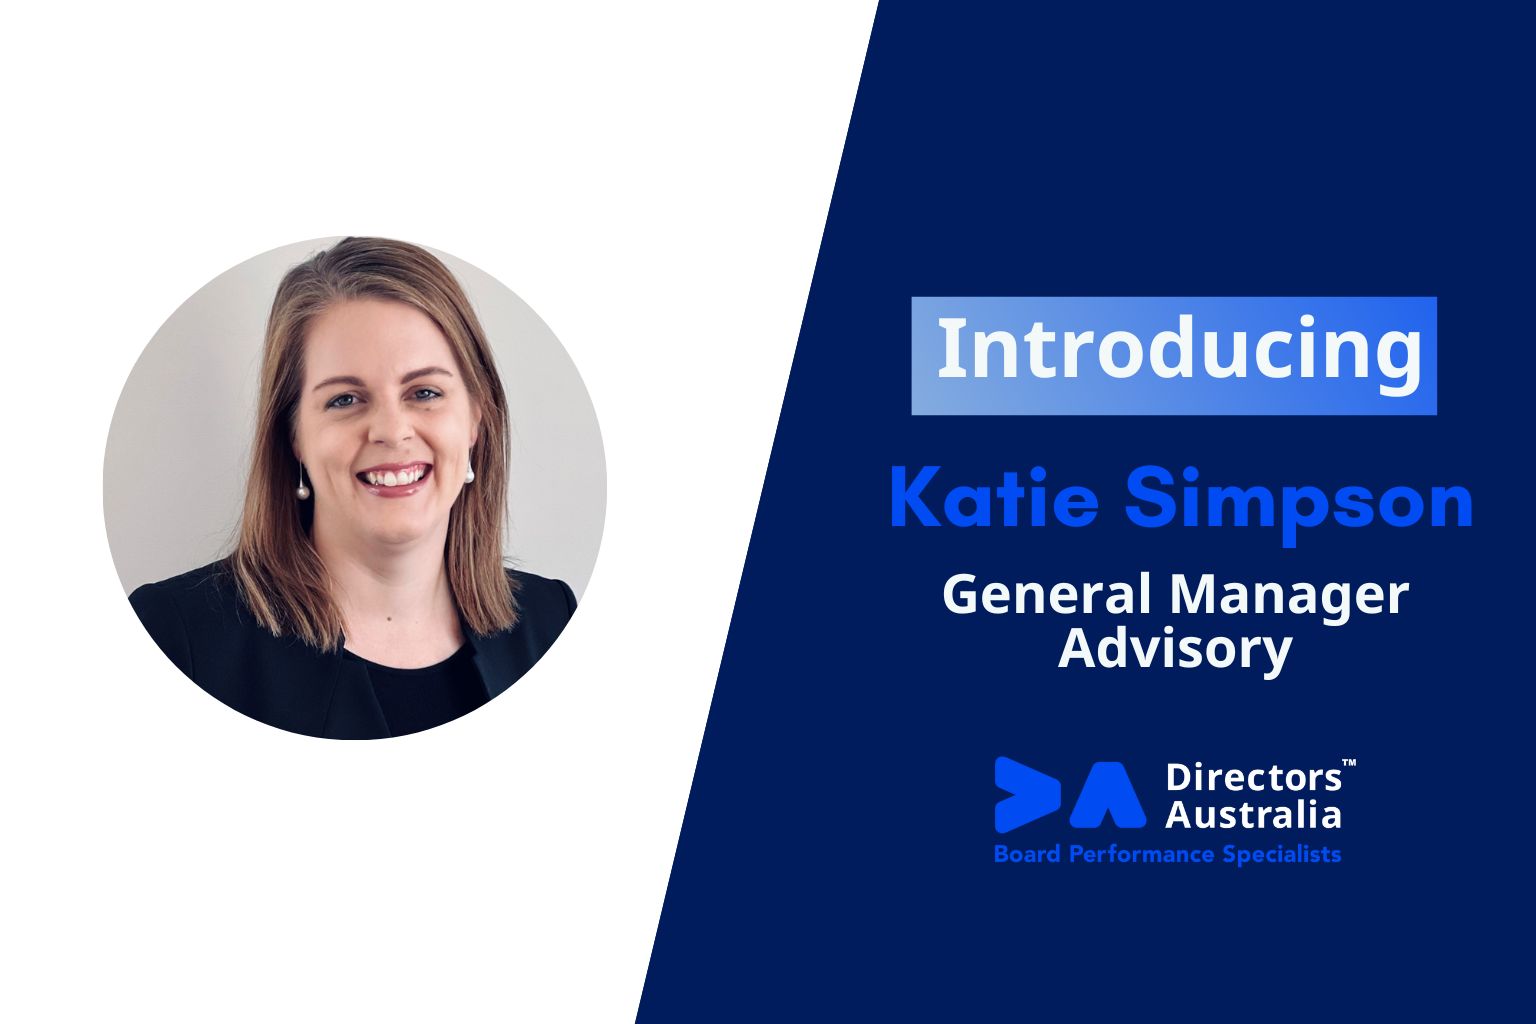 Katie Simpson appointed GM Advisory at Directors Australia